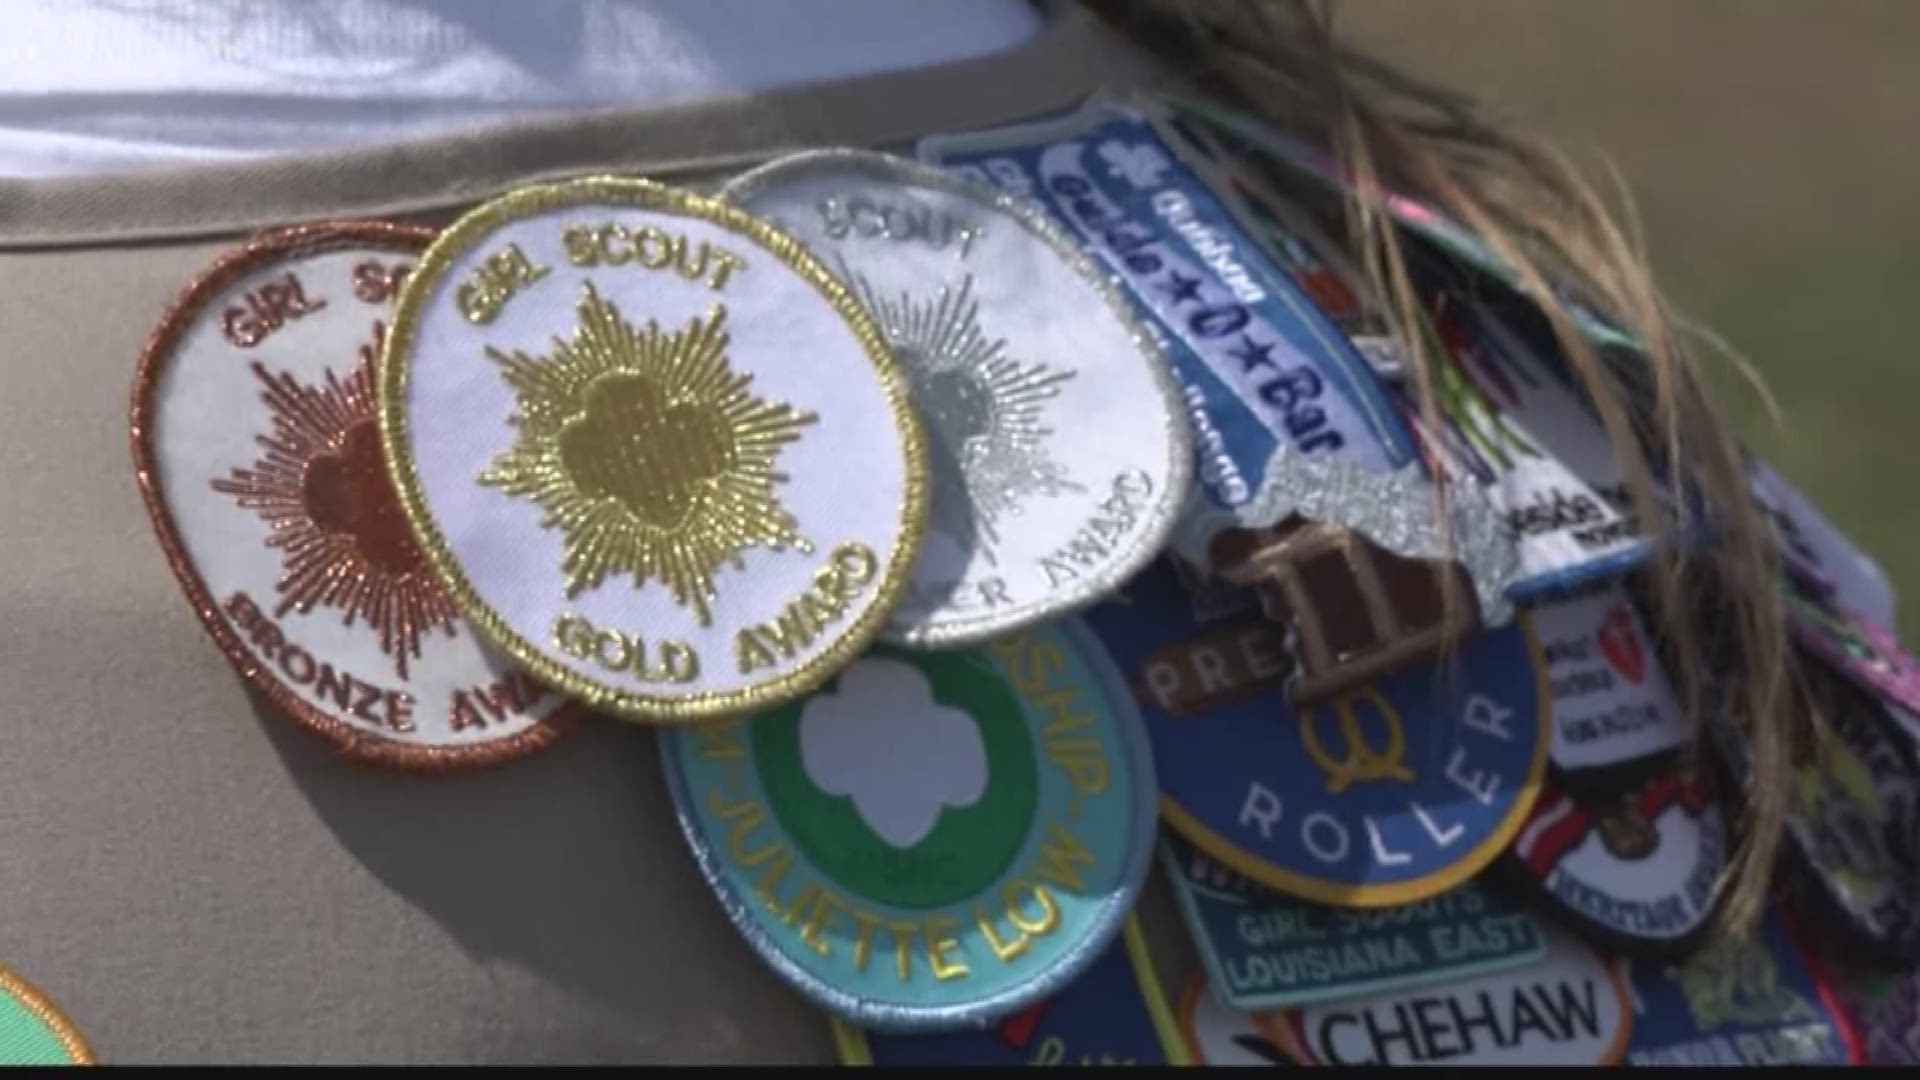 For Girl Scouts, it's all about earning the next patch to sew on their uniform and 7 Central Georgia girls won the most prestigious badge you can earn for projects that help create solutions to problems within their communities.